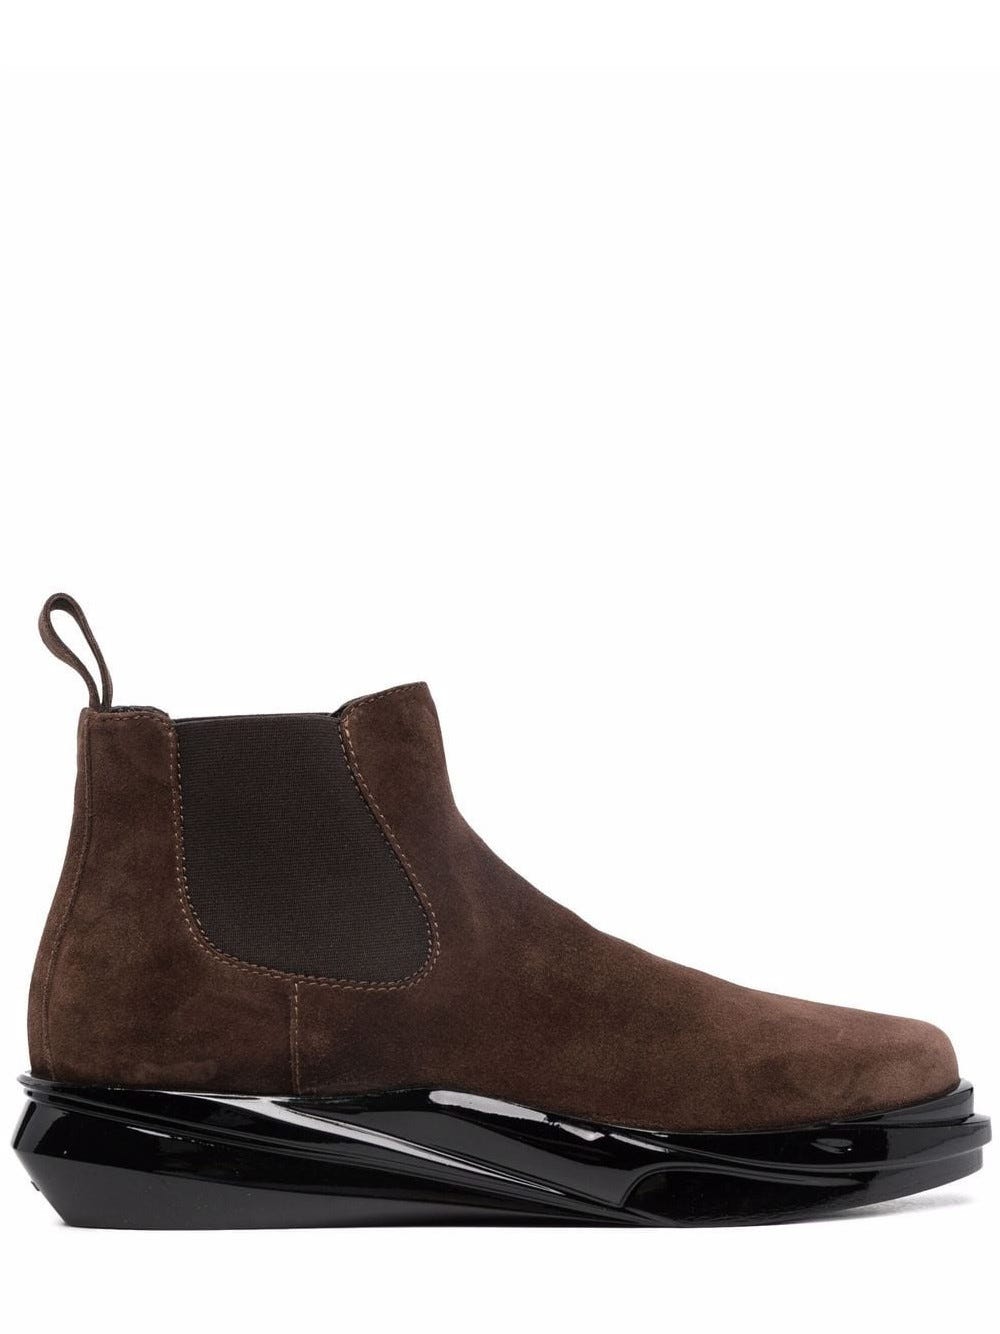 Brown Mono Chelsea suede boot